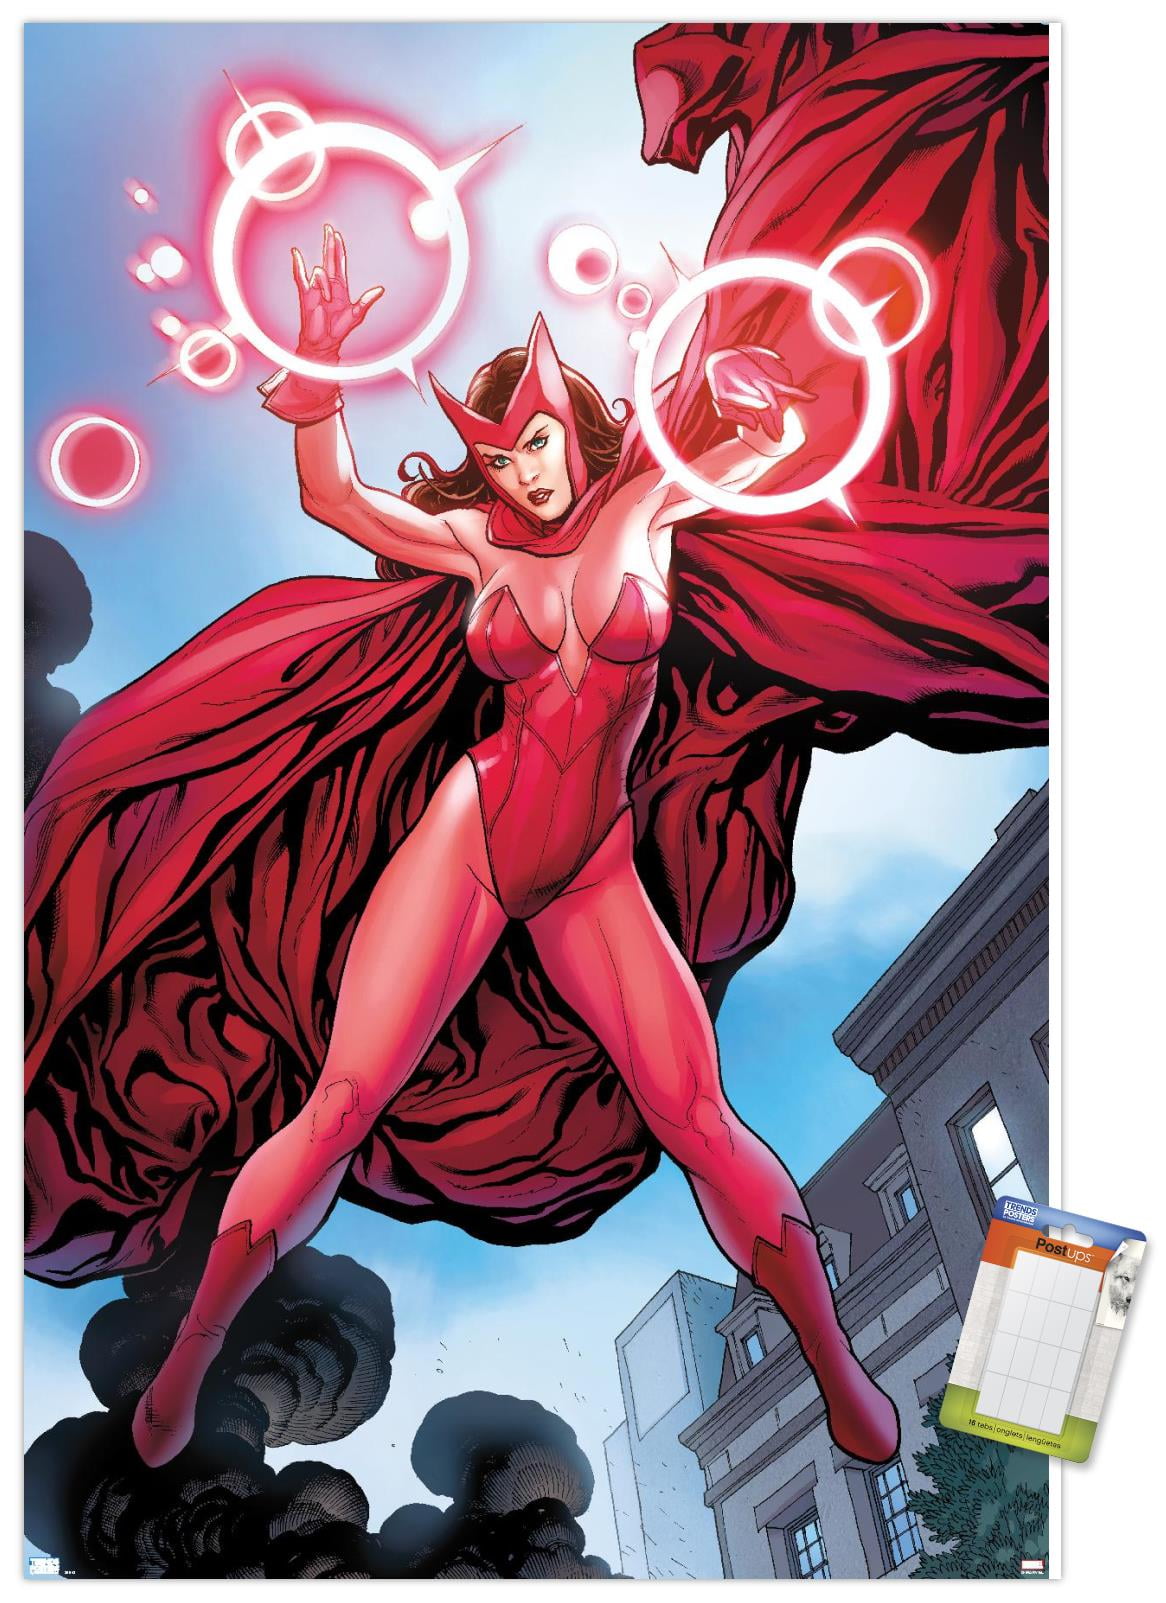 Marvel Comics - Scarlet Witch - Avengers Vs. X-Men #0 Wall Poster, 22.375  x 34 